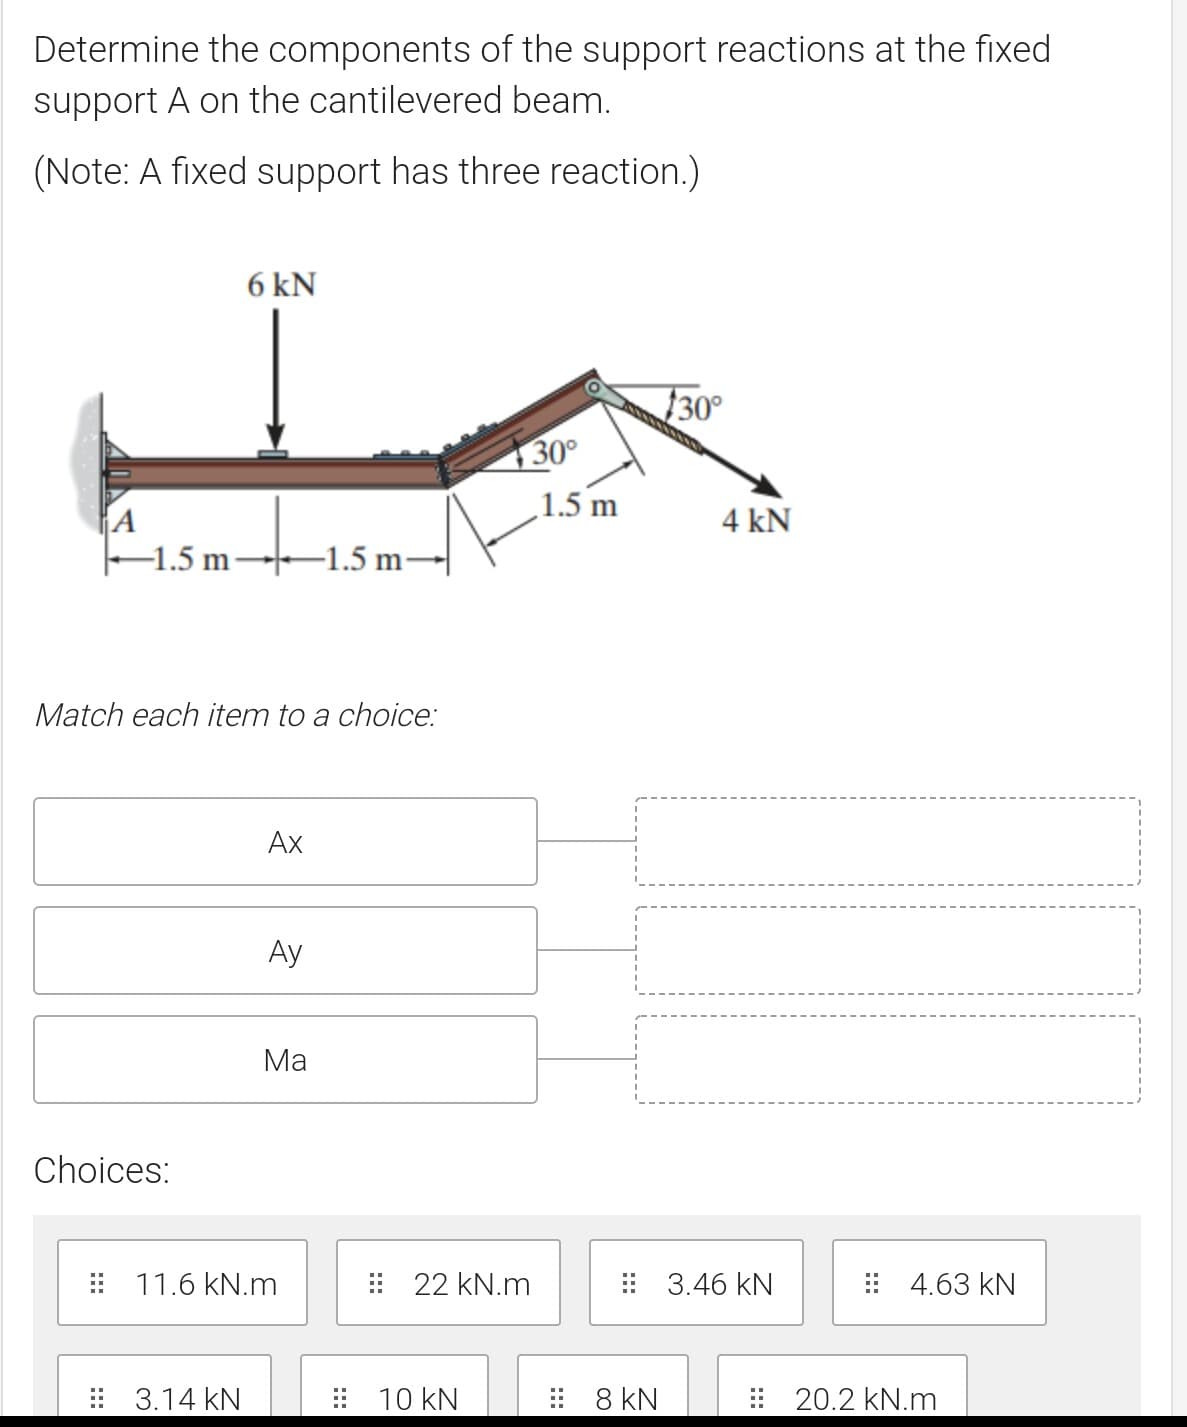 Determine the components of the support reactions at the fixed
support A on the cantilevered beam.
(Note: A fixed support has three reaction.)
6 kN
30°
30°
1.5 m
4 kN
–1.5 m––1.5 m-
Match each item to a choice:
Ах
Ay
Ма
Choices:
: 11.6 kN.m
22 kN.m
: 3.46 kN
: 4.63 kN
: 3.14 kN
: 10 kN
: 8 KN
: 20.2 kN.m
:::
